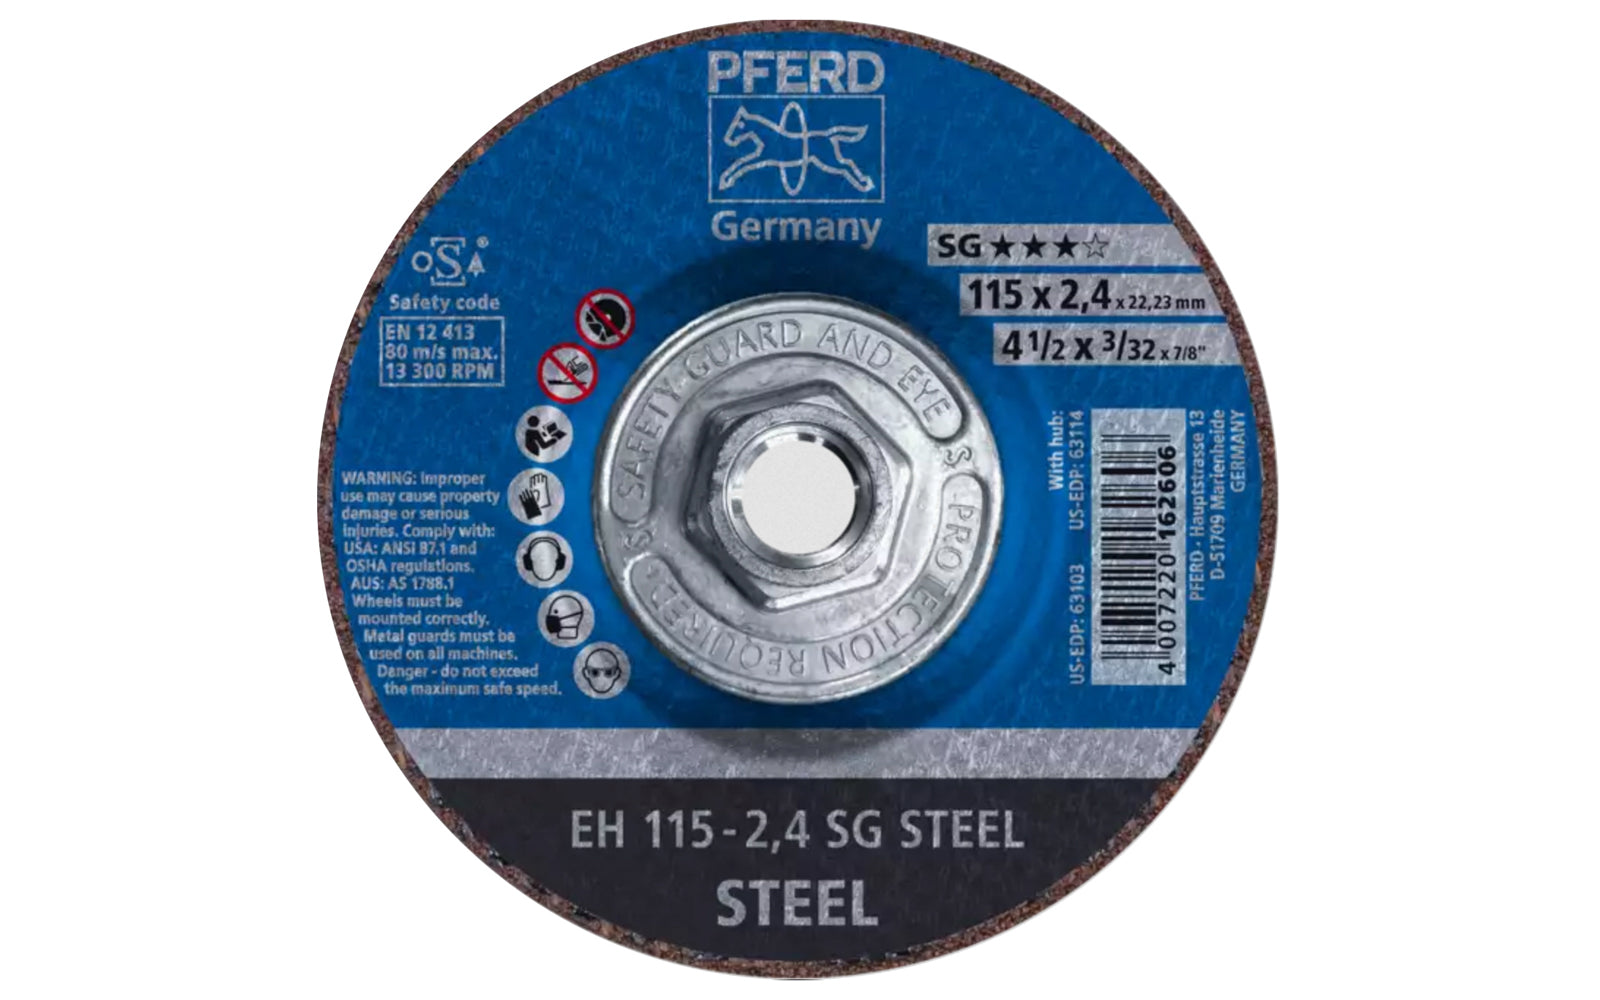 High quality 4-1/2" Cut-Off Wheel made by Pferd in Germany. Model 63114. Designed for steel, cutting of sheet metal, sections, cutting solid material. Fast cutting action. 4-1/2" diameter. 5/8-11 Threaded hub. 3/32" thickness of blade. 4007220694657. Made in Germany.